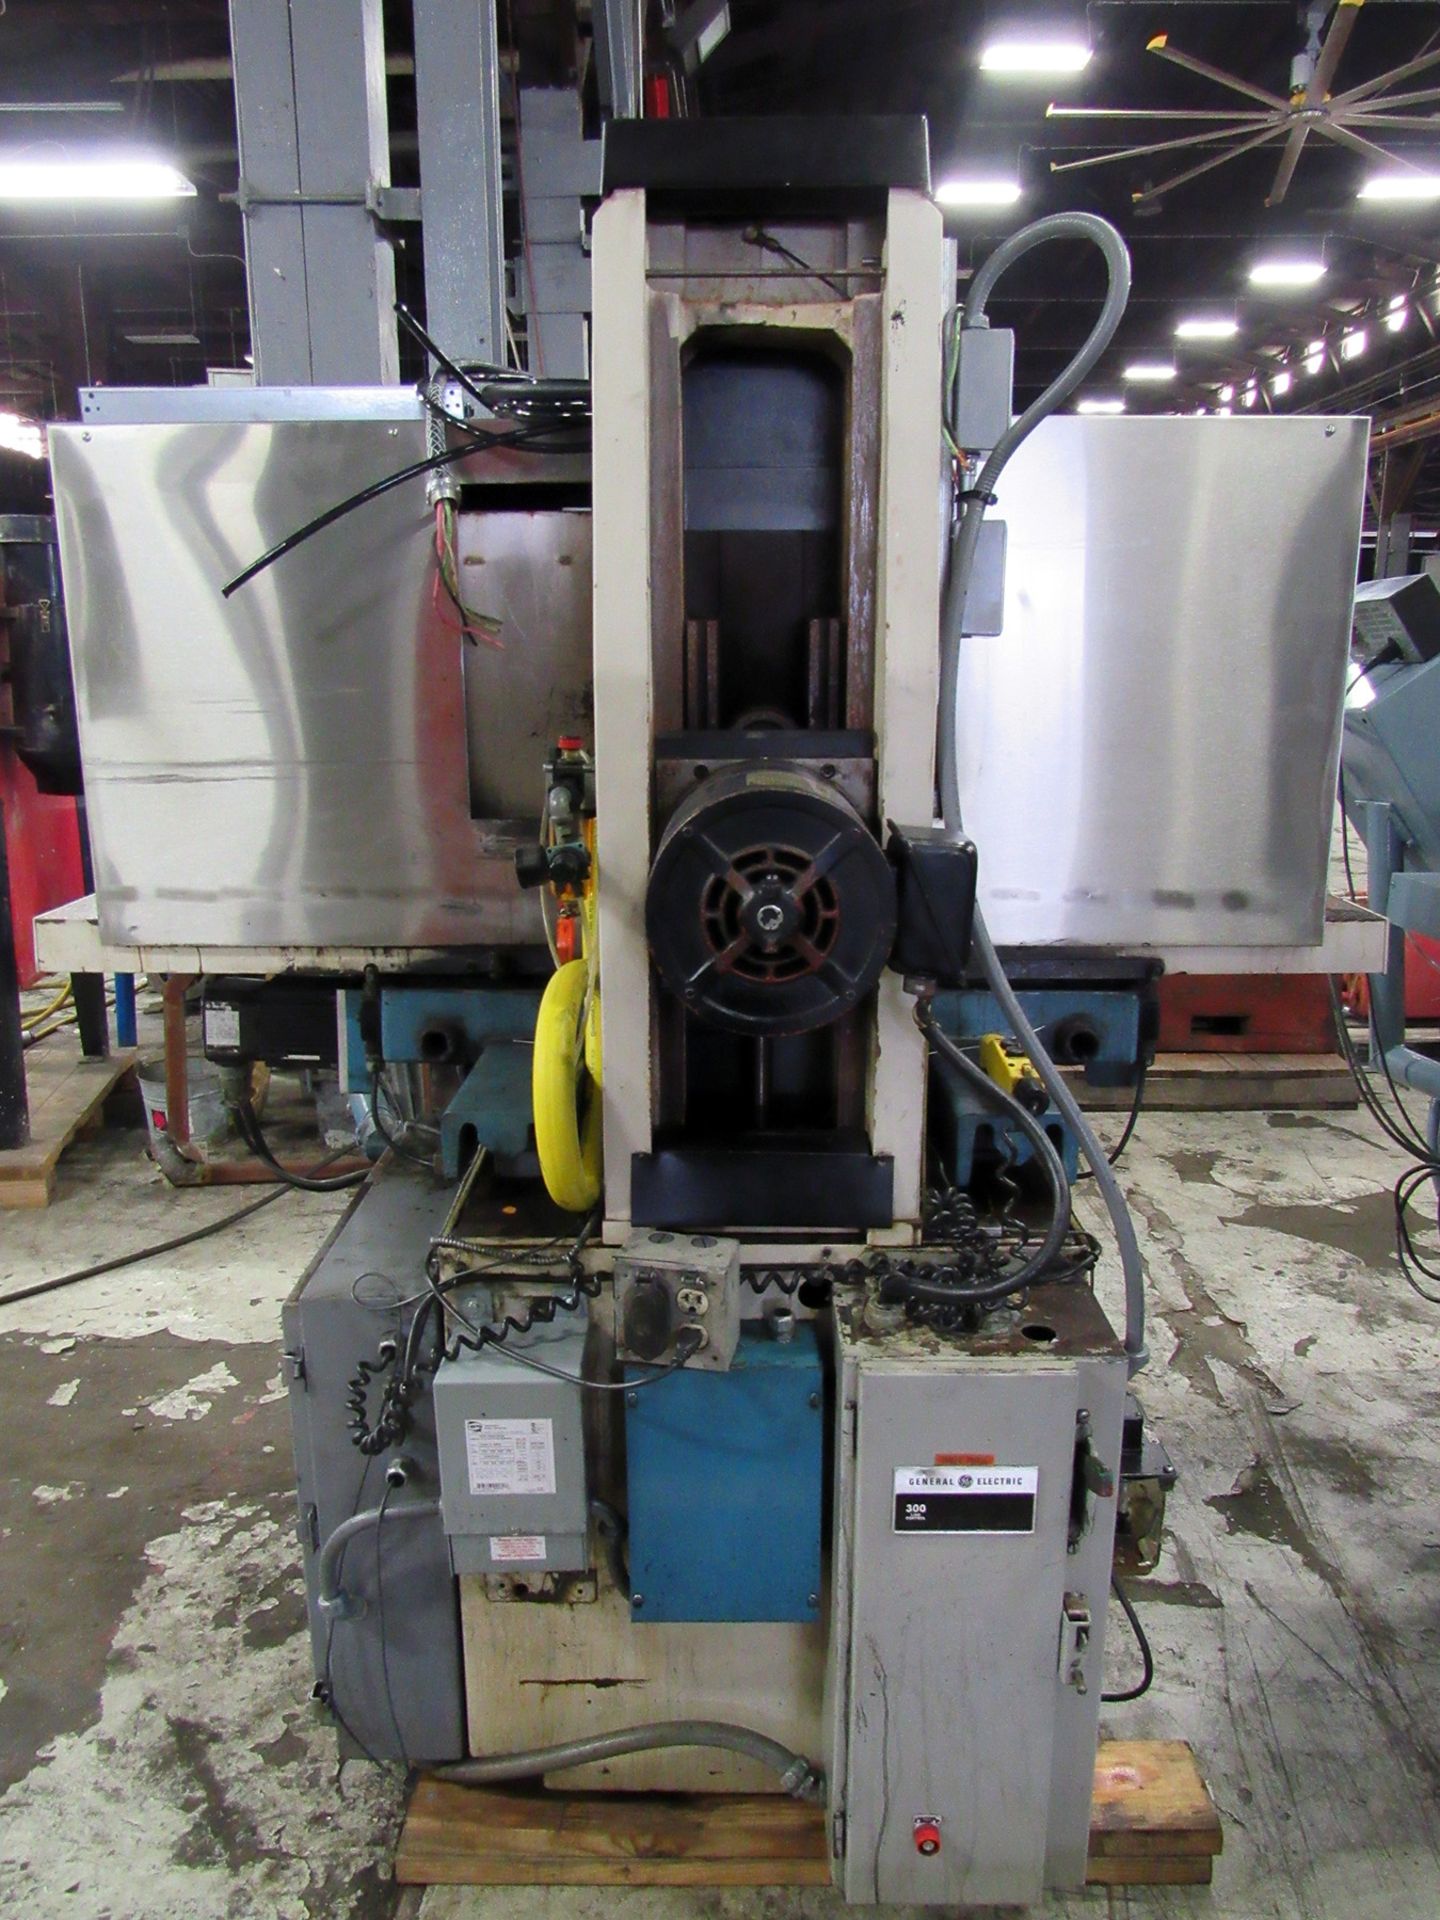 K.O. LEE MODEL S1024-550 CREEP FEED TYPE RECIPROCATING TABLE SURFACE GRINDER - Image 11 of 11